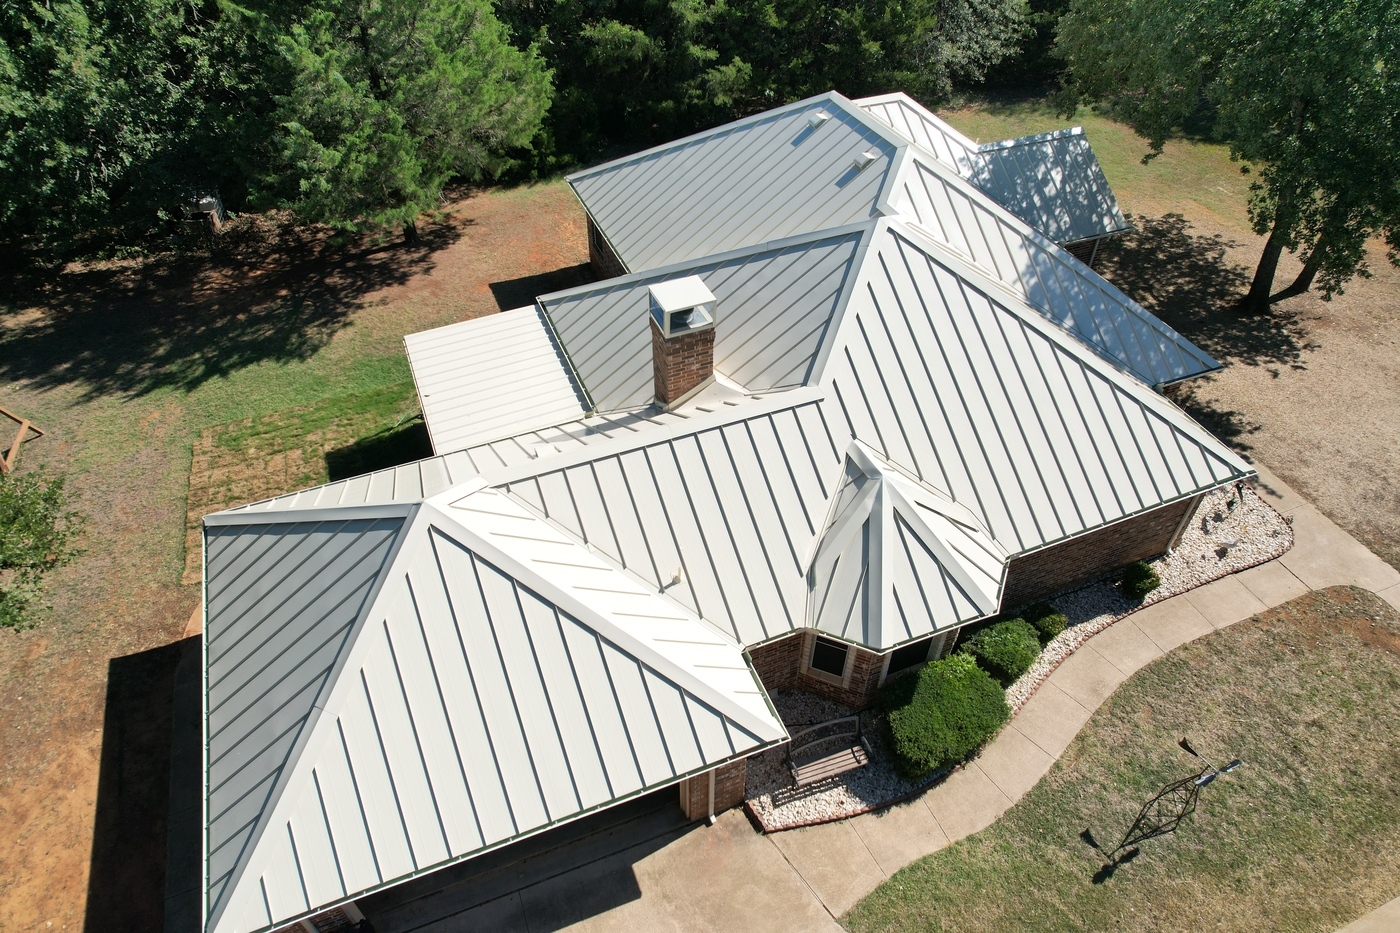 GreenLight Roofing and Remodeling Now Offers Hassle-Free Zero-Interest Financing